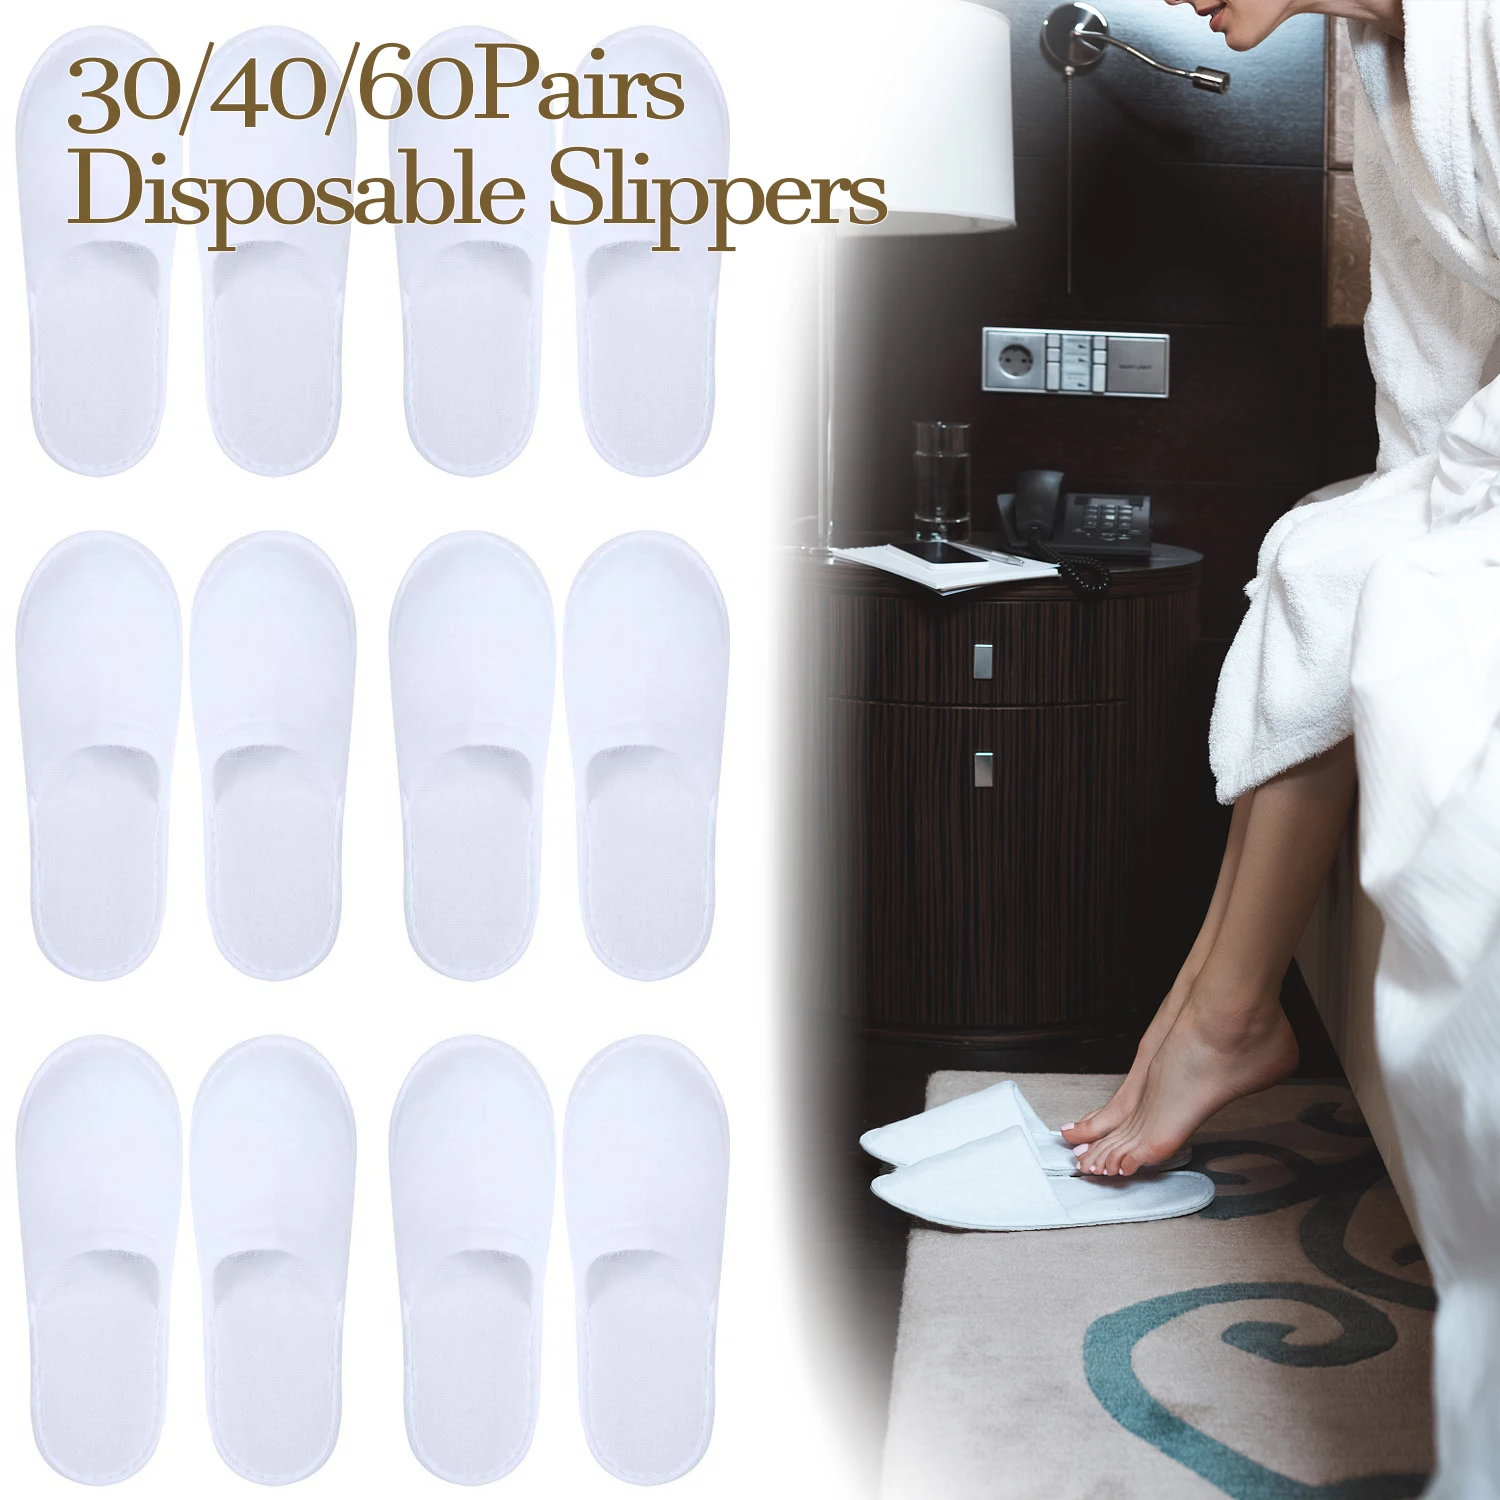 

30/40/60Pairs Disposable Slippers For Guests Hotel Amenities Sets Closed Toe Slippers Unisex Non-Slip Slippers for Home Guests